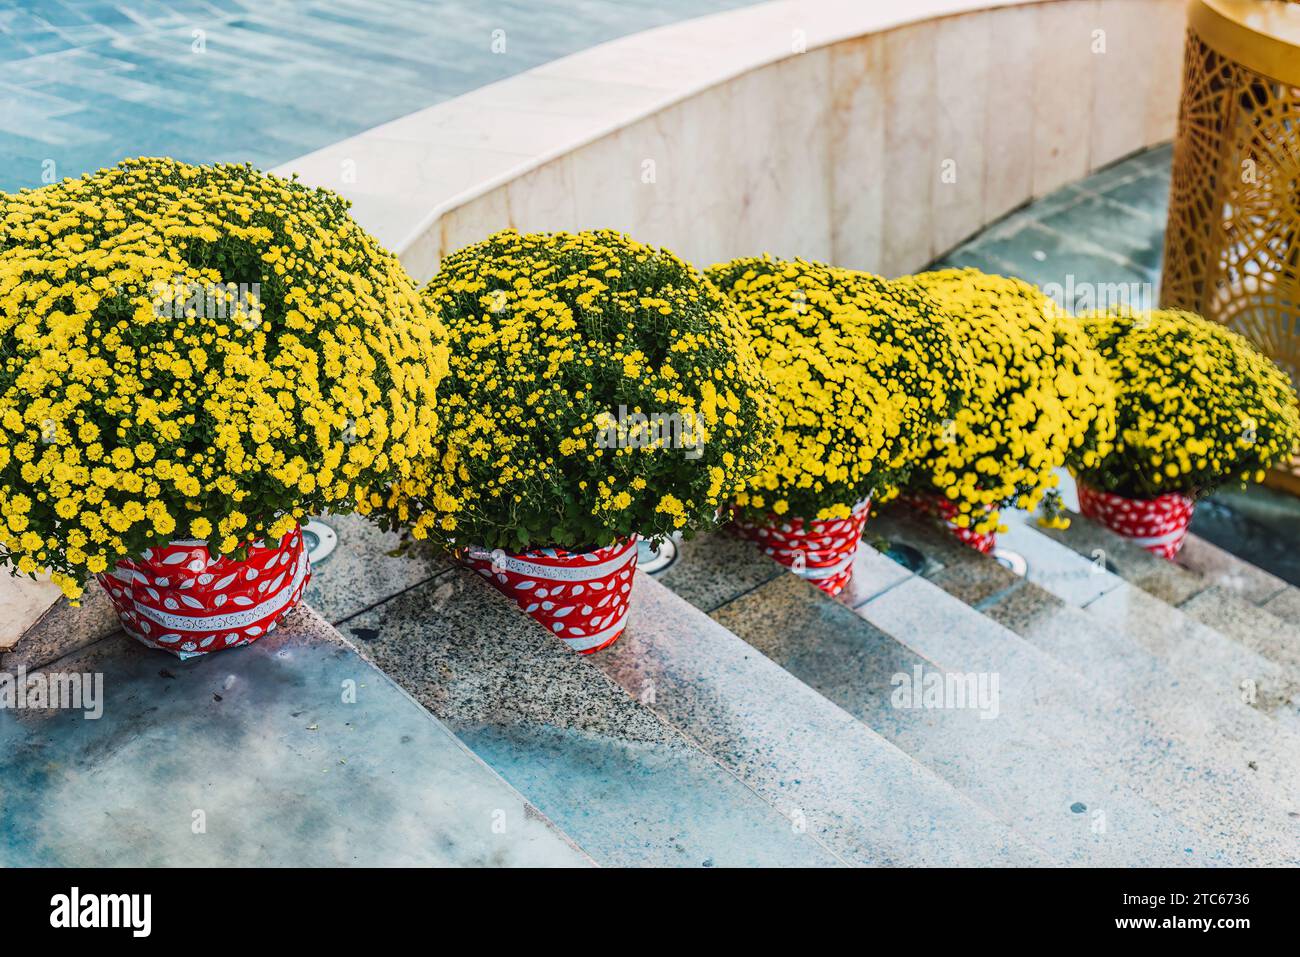 decoration and chrysanthemums flowers as symbol of wealth for Tet Lunar New Year Stock Photo